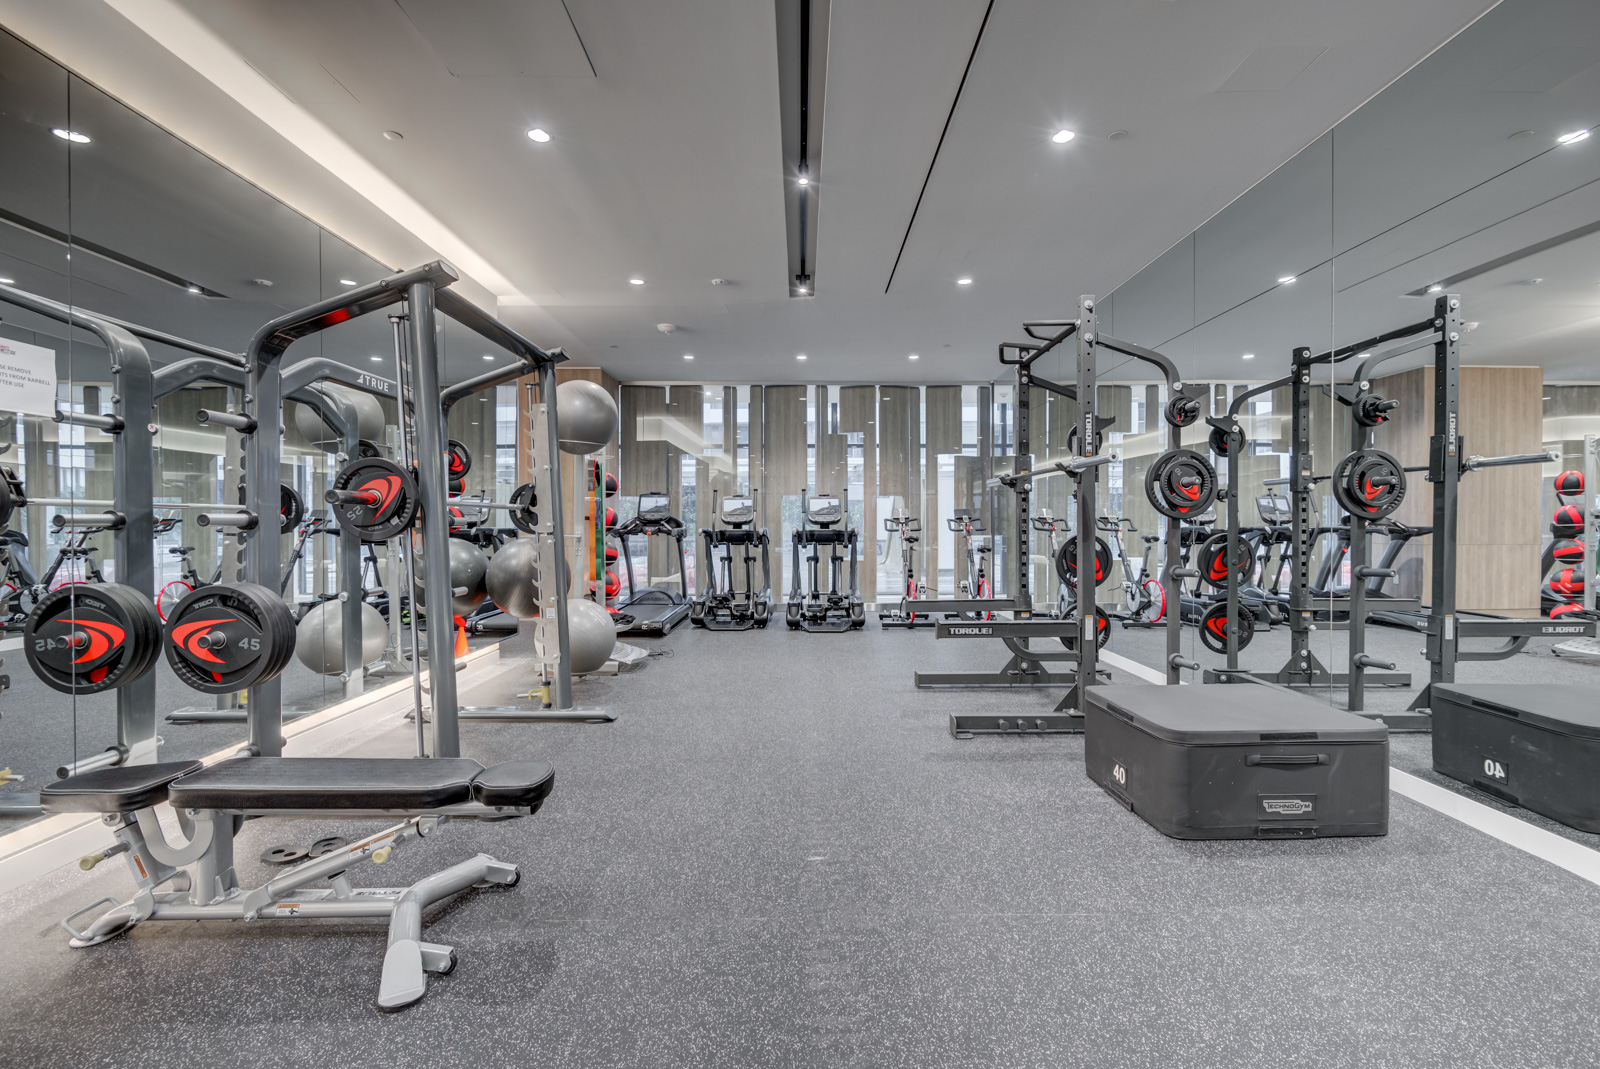 Modern gym at Minto Condos with weights, treadmills, exercise bikes and exercise balls.